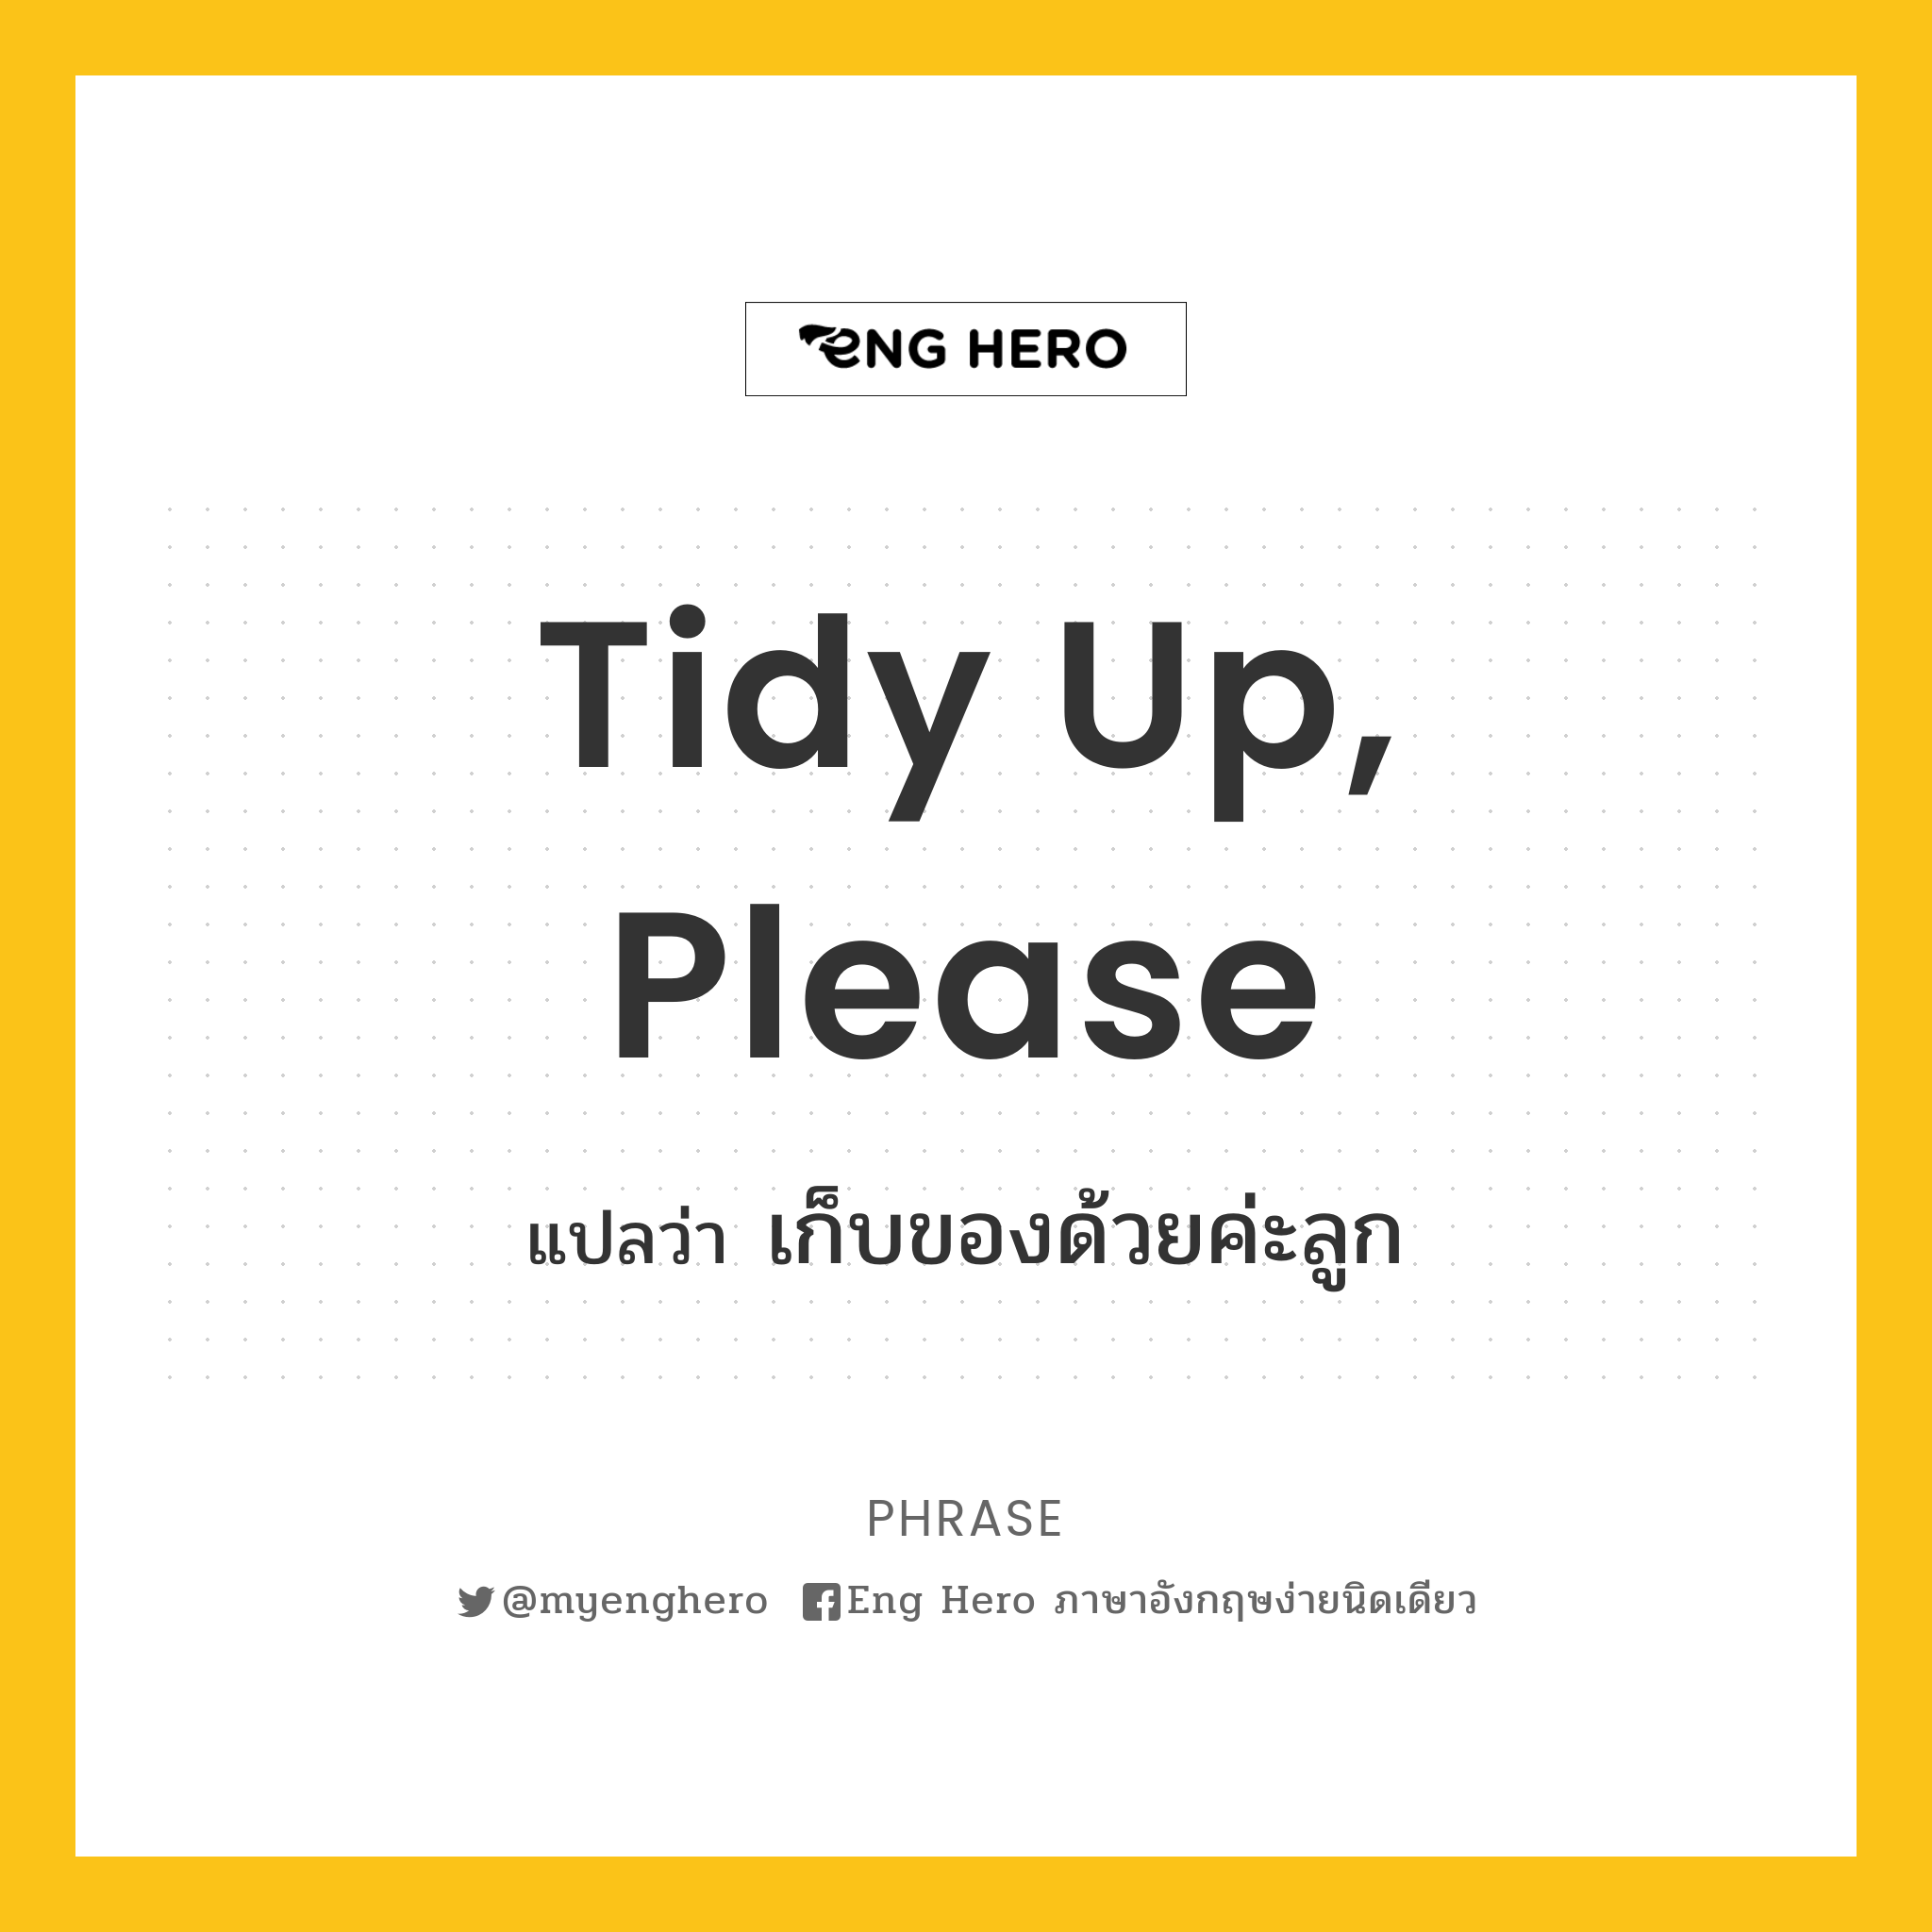 Tidy up, please